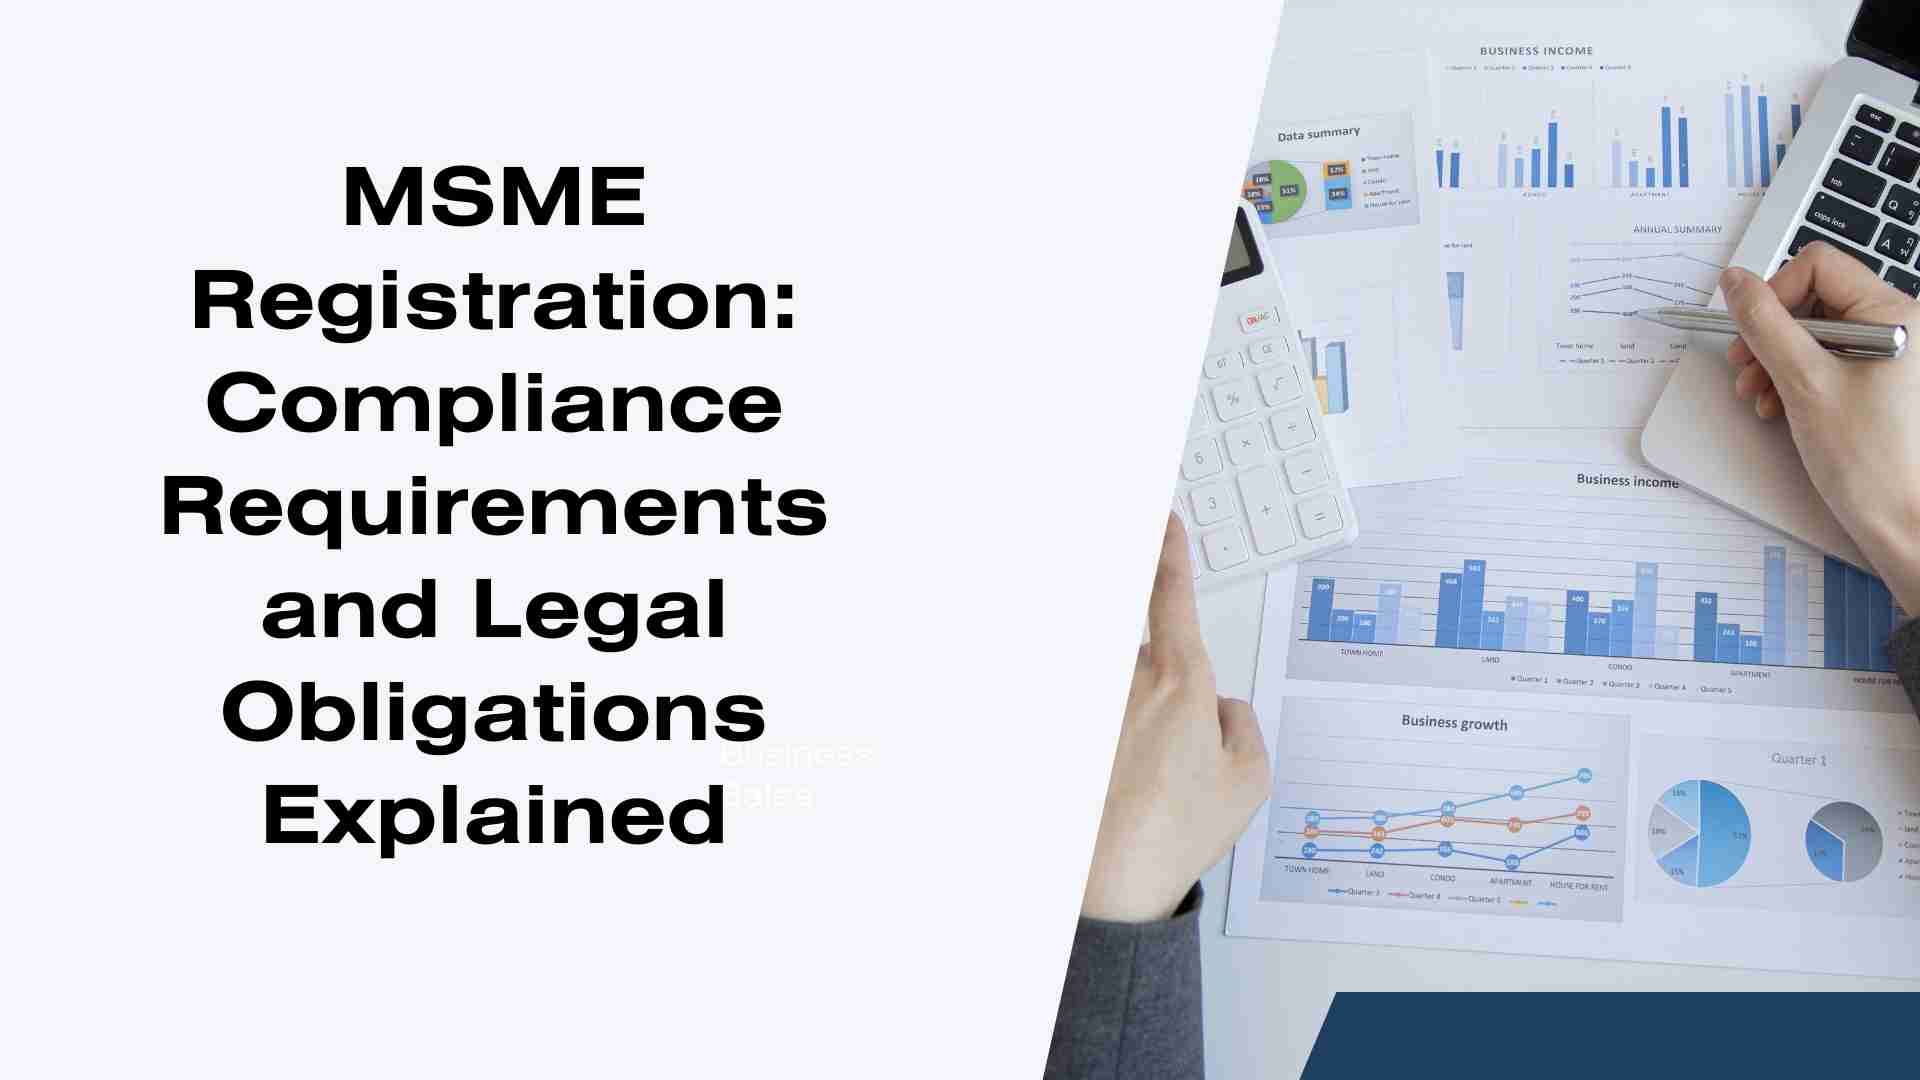 MSME Registration: Compliance Requirements and Legal Obligations Explained